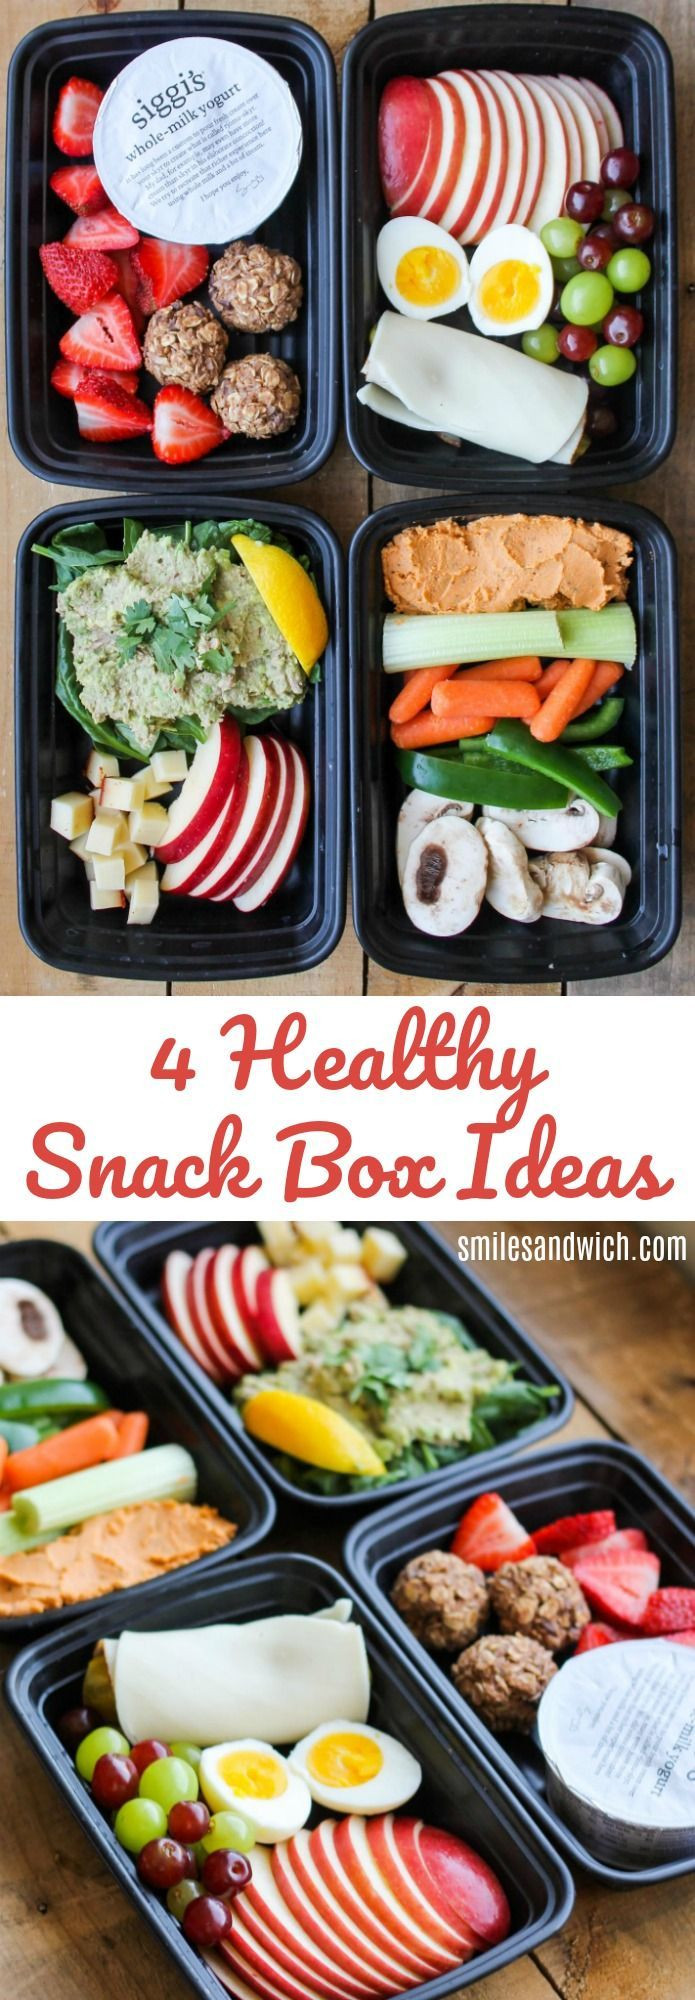 Healthy Carb Snacks
 The 25 best No cook appetizers ideas on Pinterest